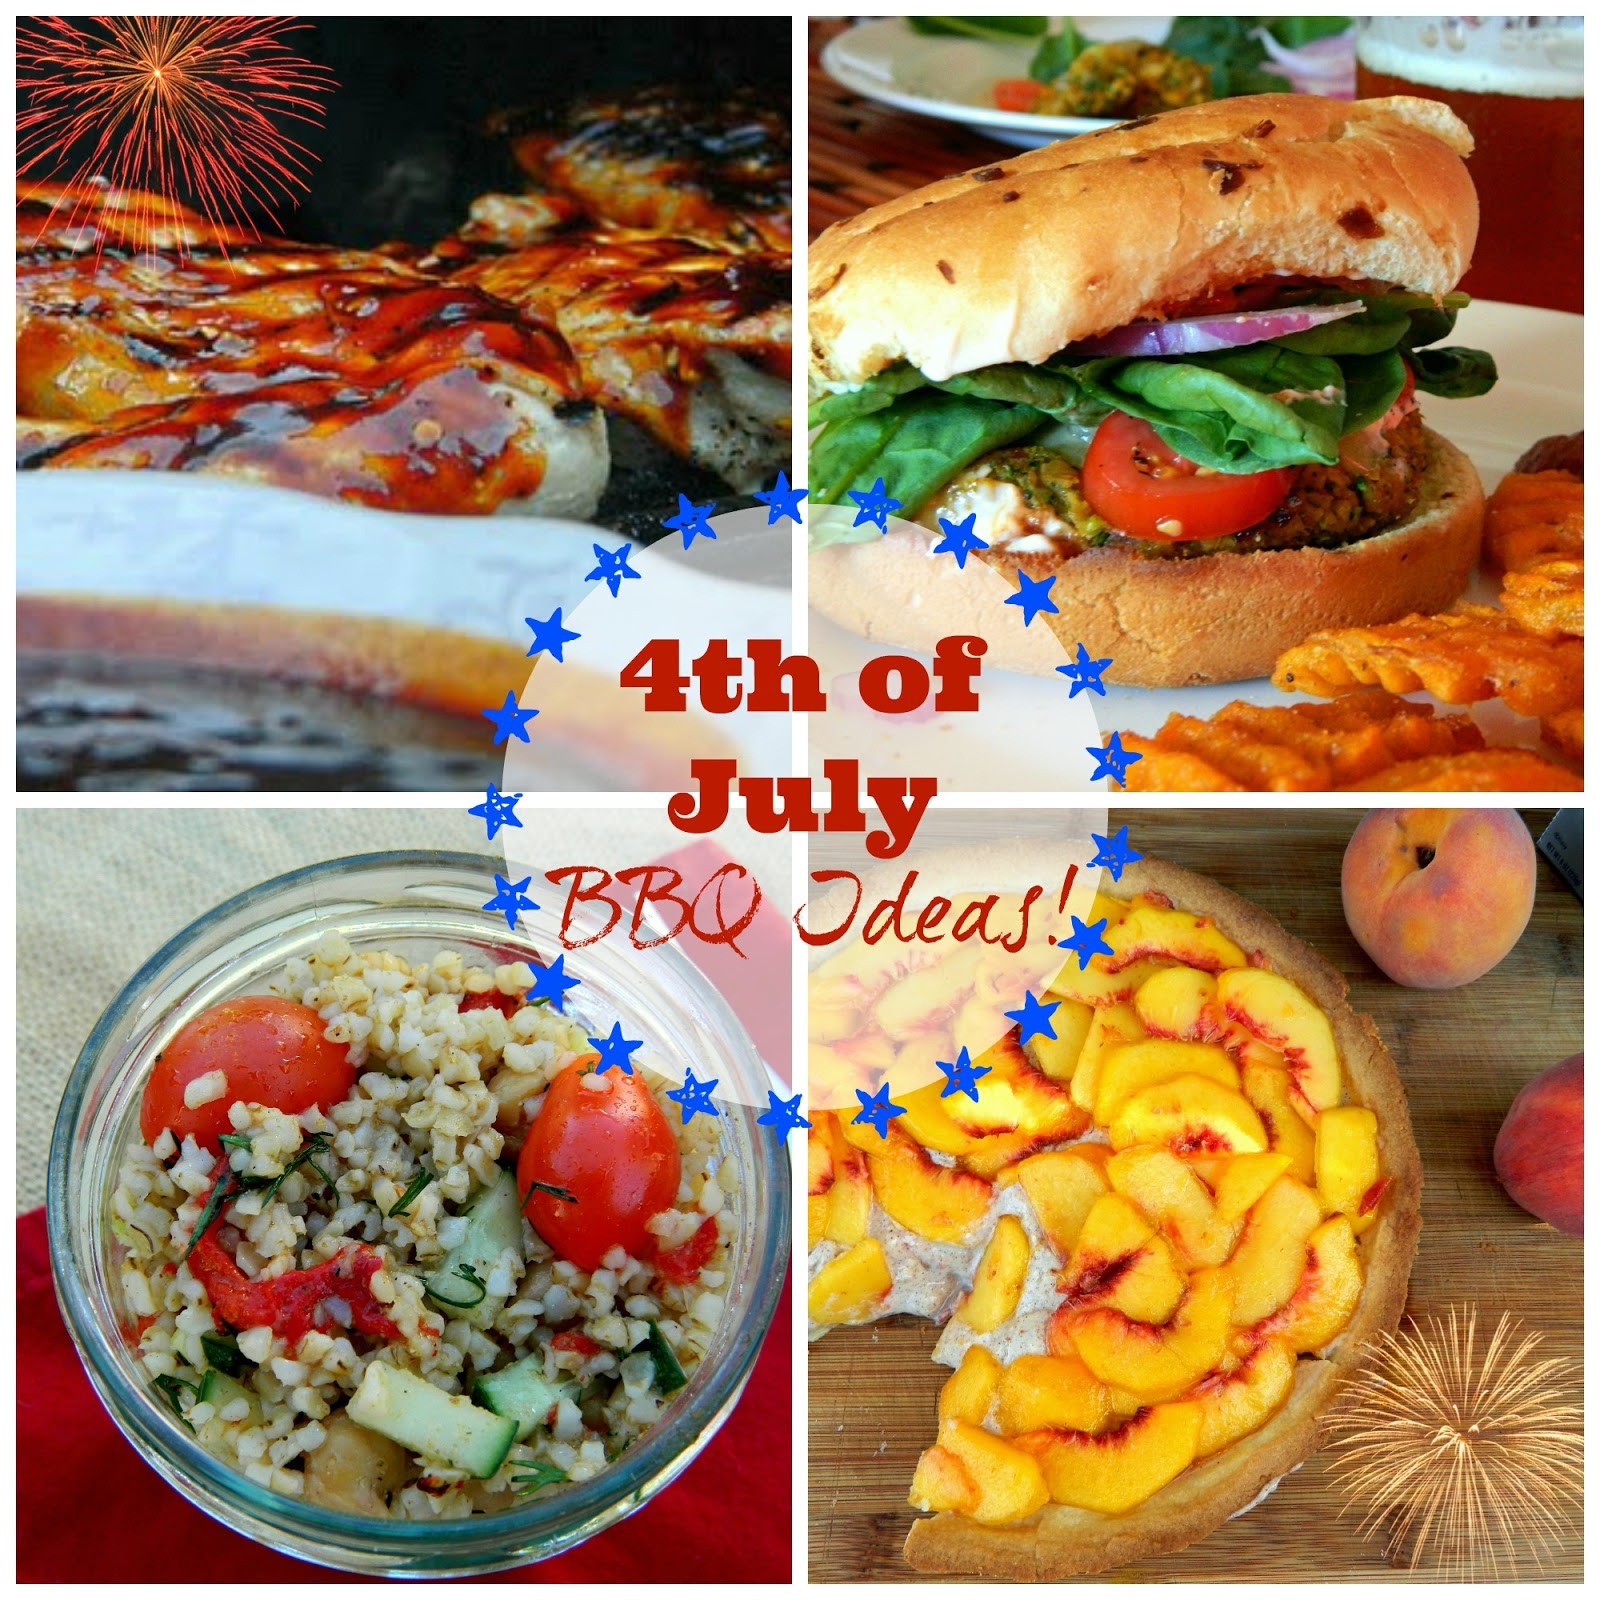 4th Of July Bbq Food Ideas
 The Cyclist s Wife 4th of July BBQ Ideas